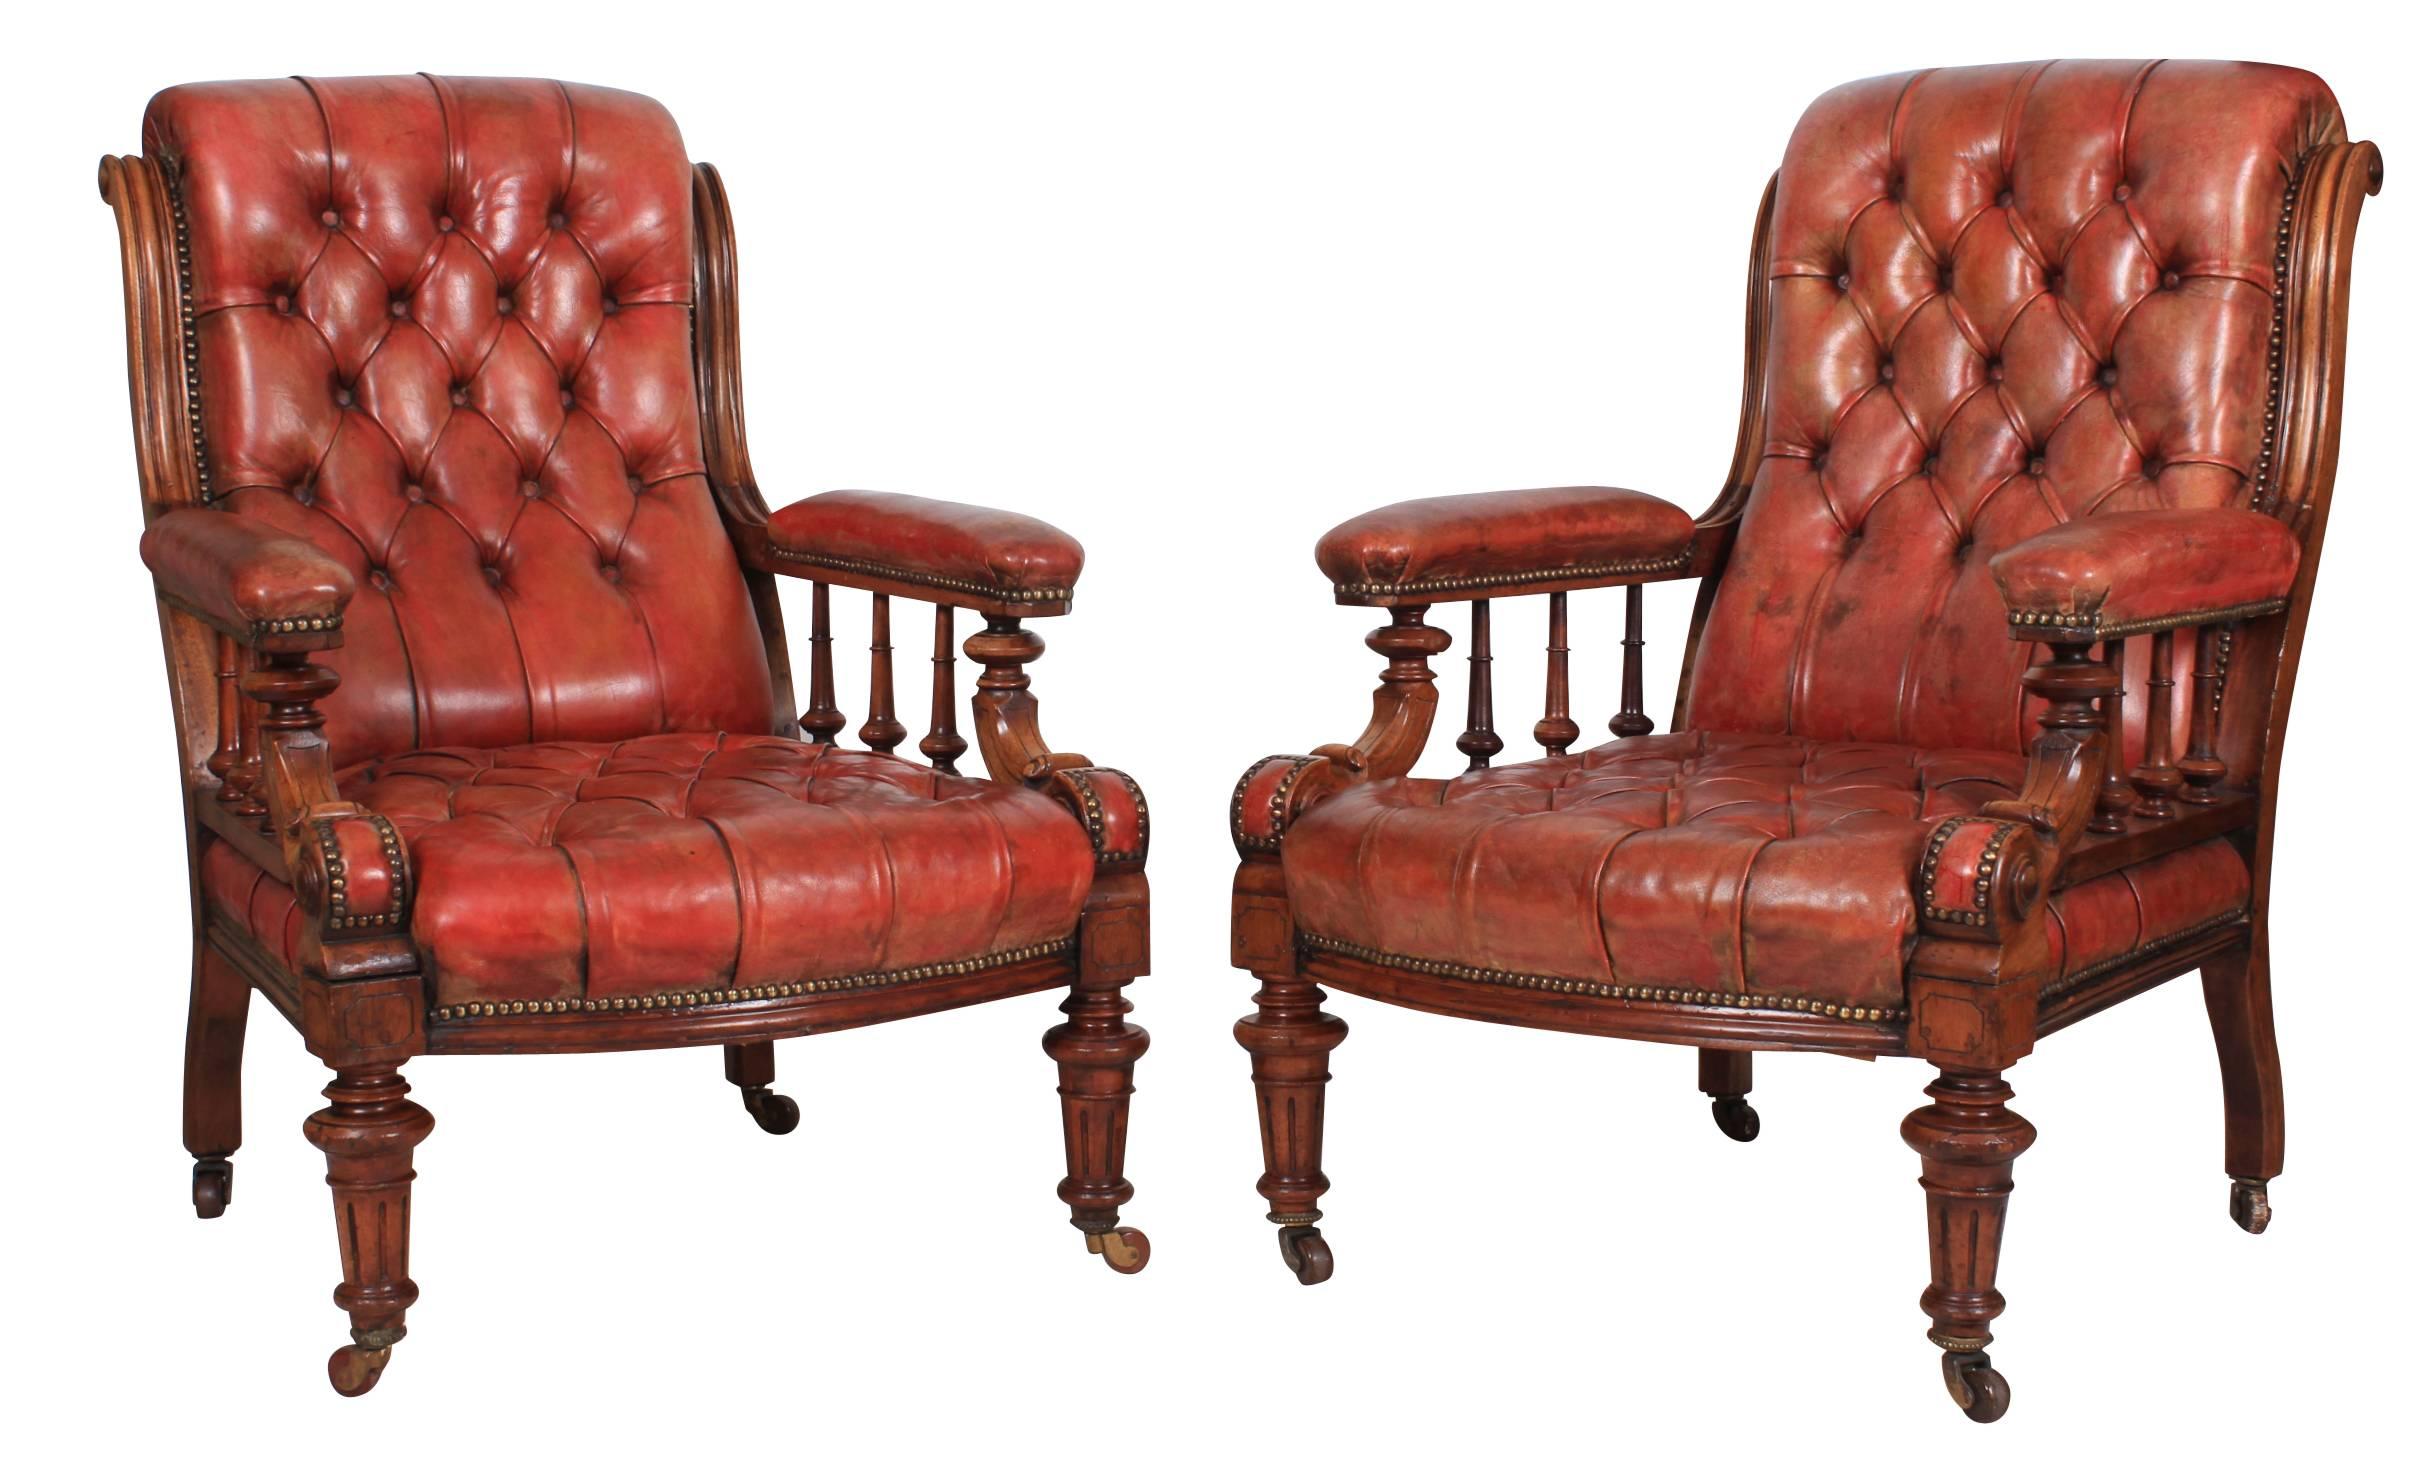 Late 19th Century Superb Pair of Walnut and Leather Library Chairs